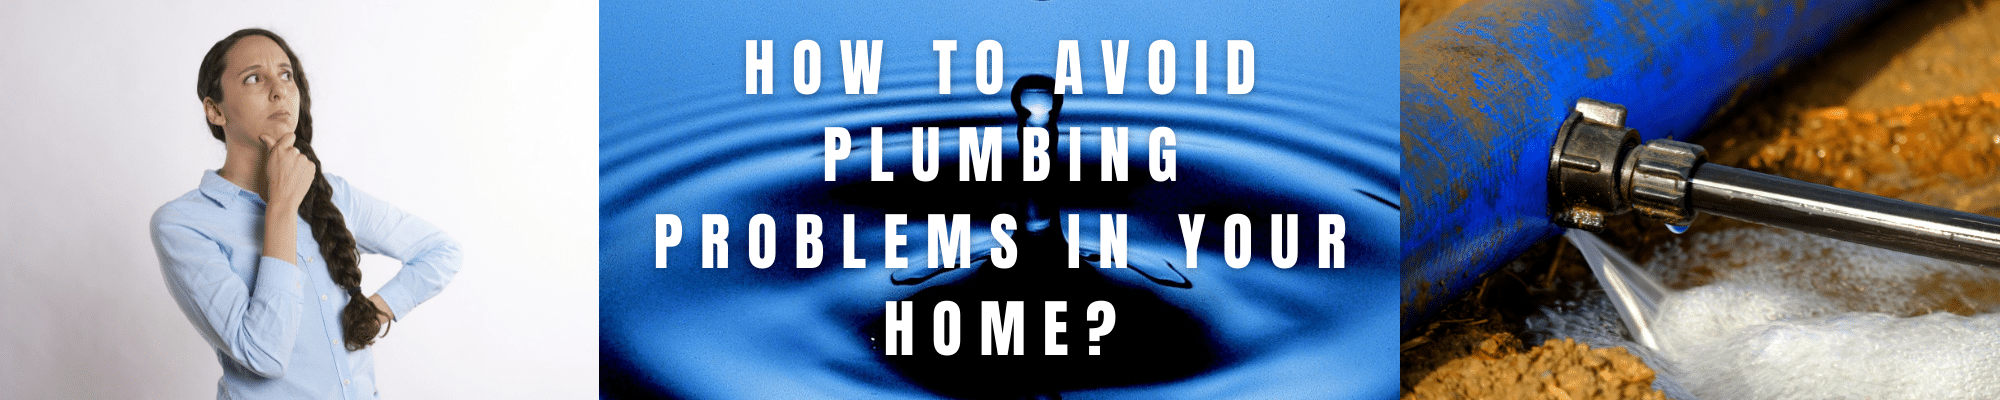 How To Avoid Plumbing Problems In Your Home